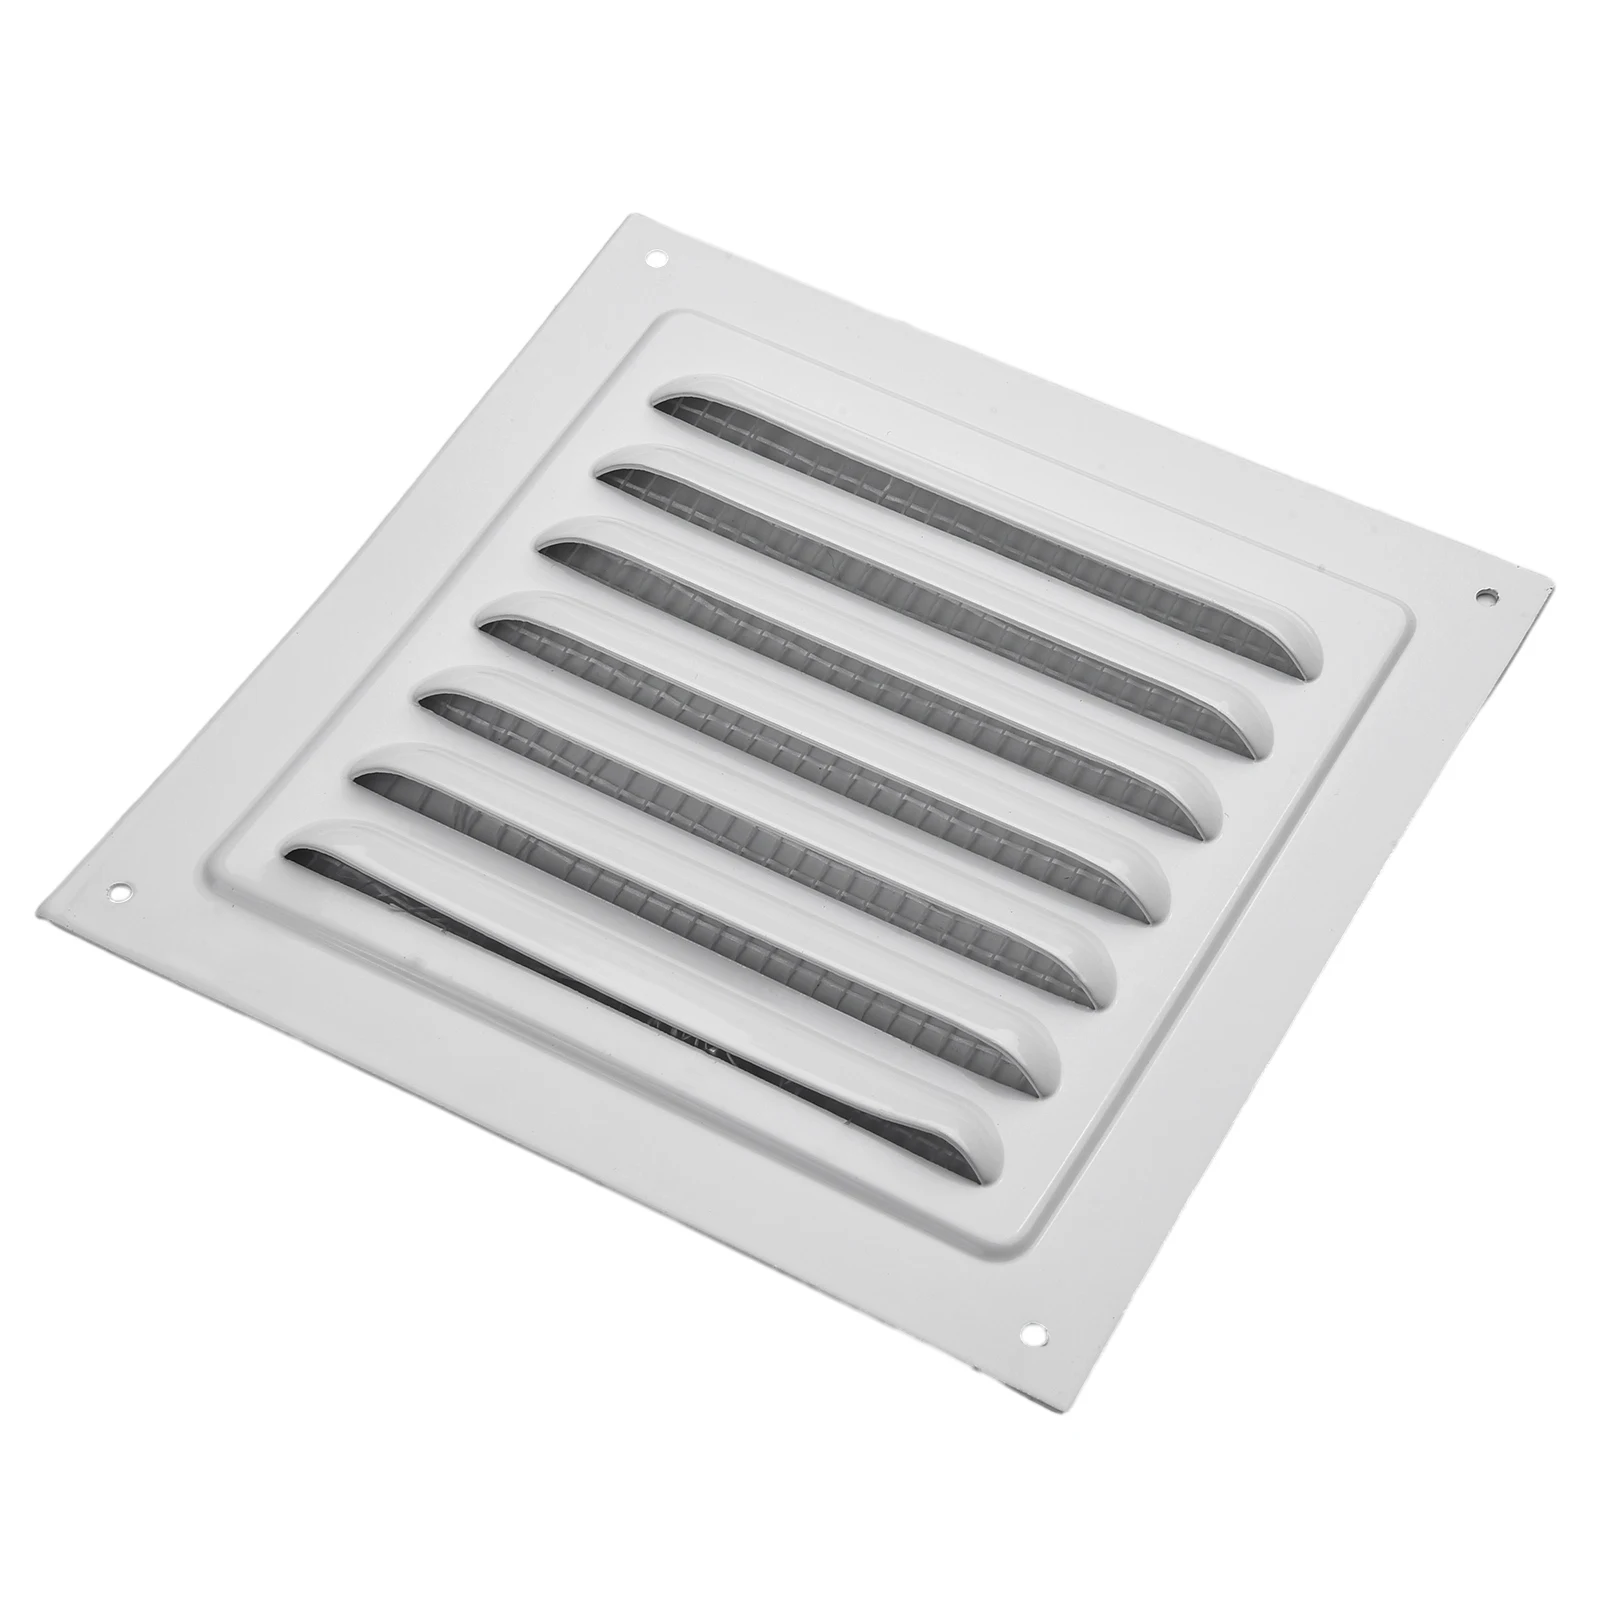 

Air Vent Grille Ventilation Cover Metal Window Square Vent Insect Screen Cover Aluminum Alloy Heating Cooling Vents Plate